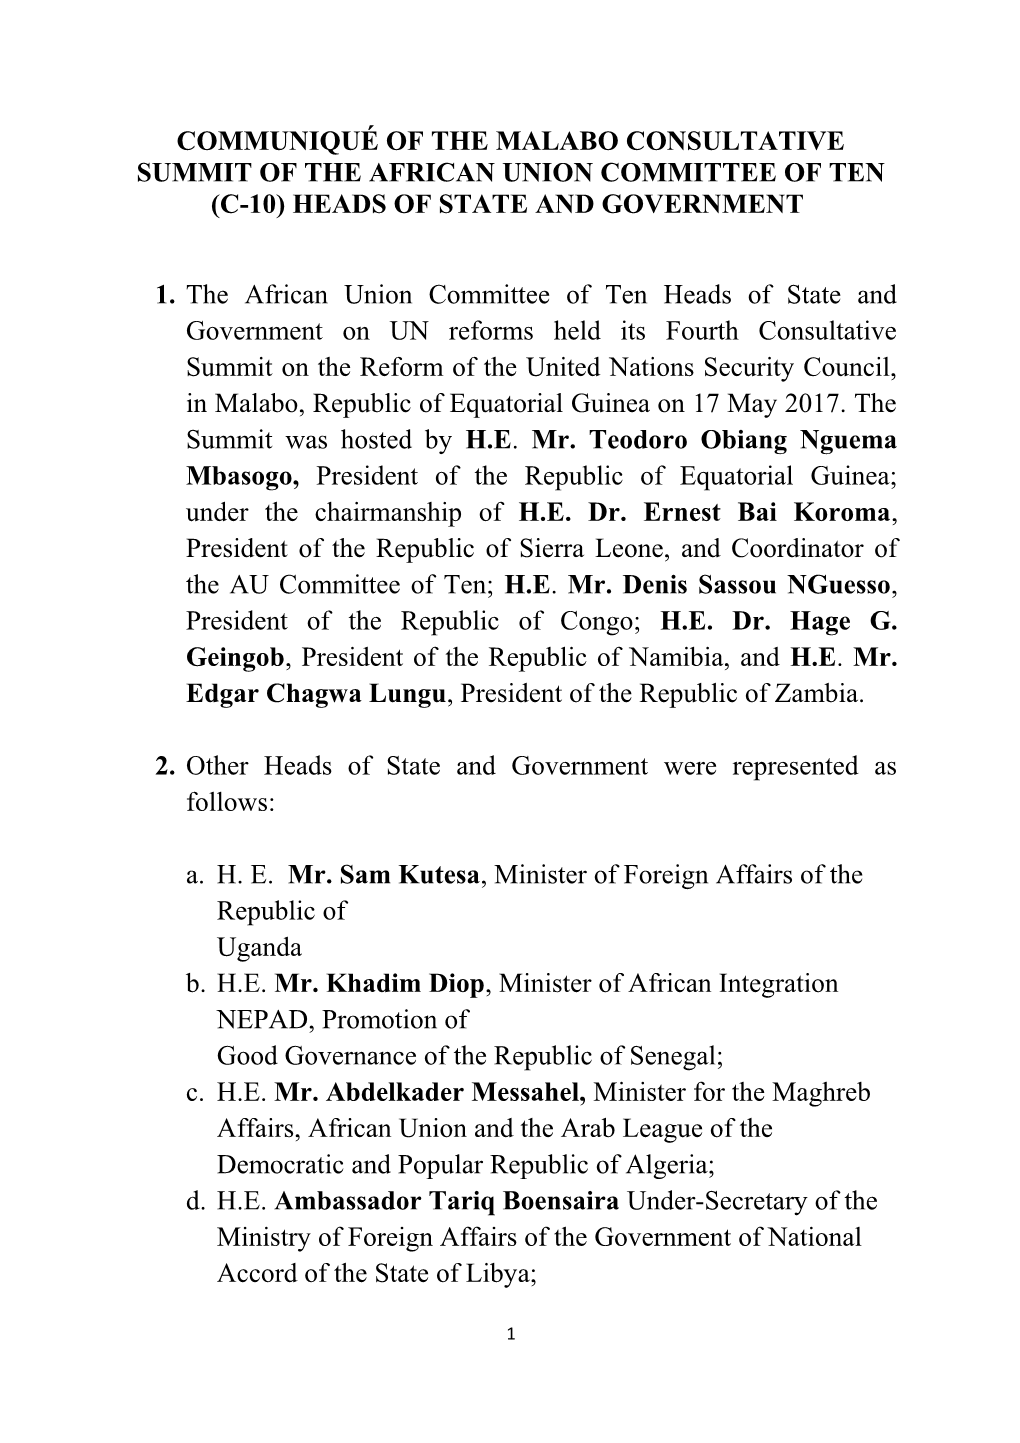 Communiqué of the Malabo Consultative Summit of the African Union Committee of Ten (C-10)